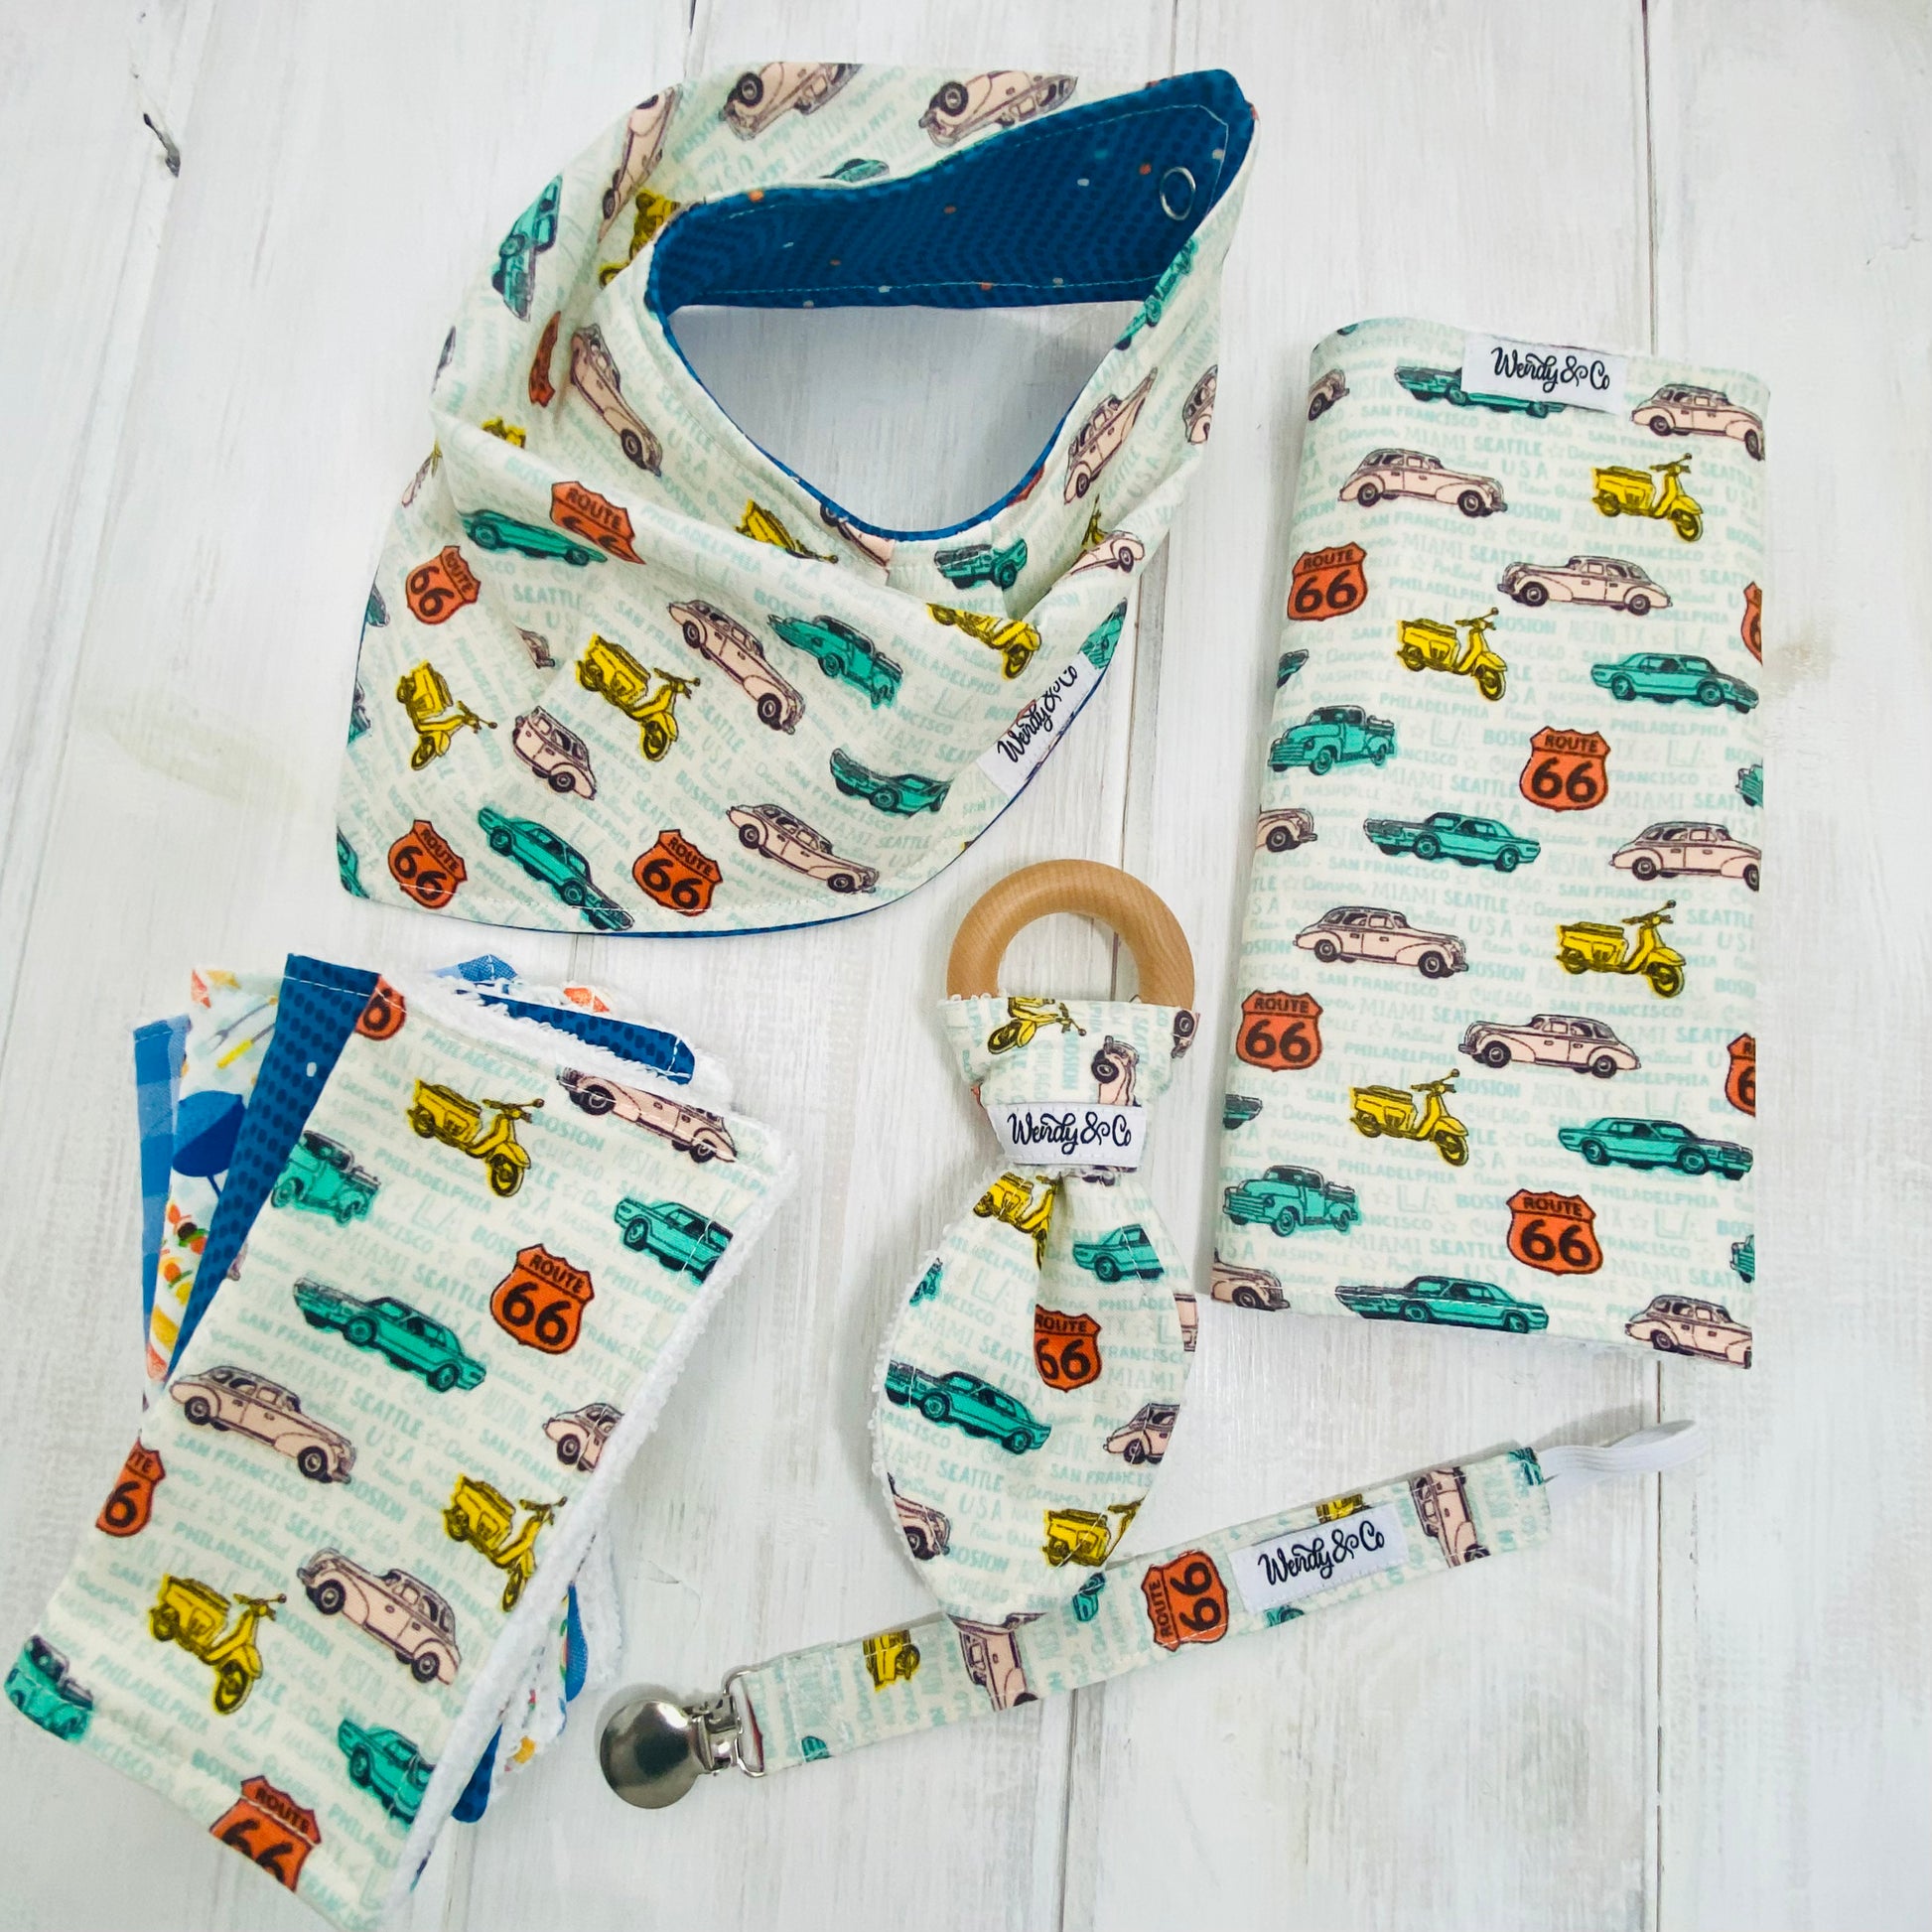 Baby boy gift set including burp cloth, washing cloths, paci clip, teether and reversible bandana bib, in Route 66 fabric.